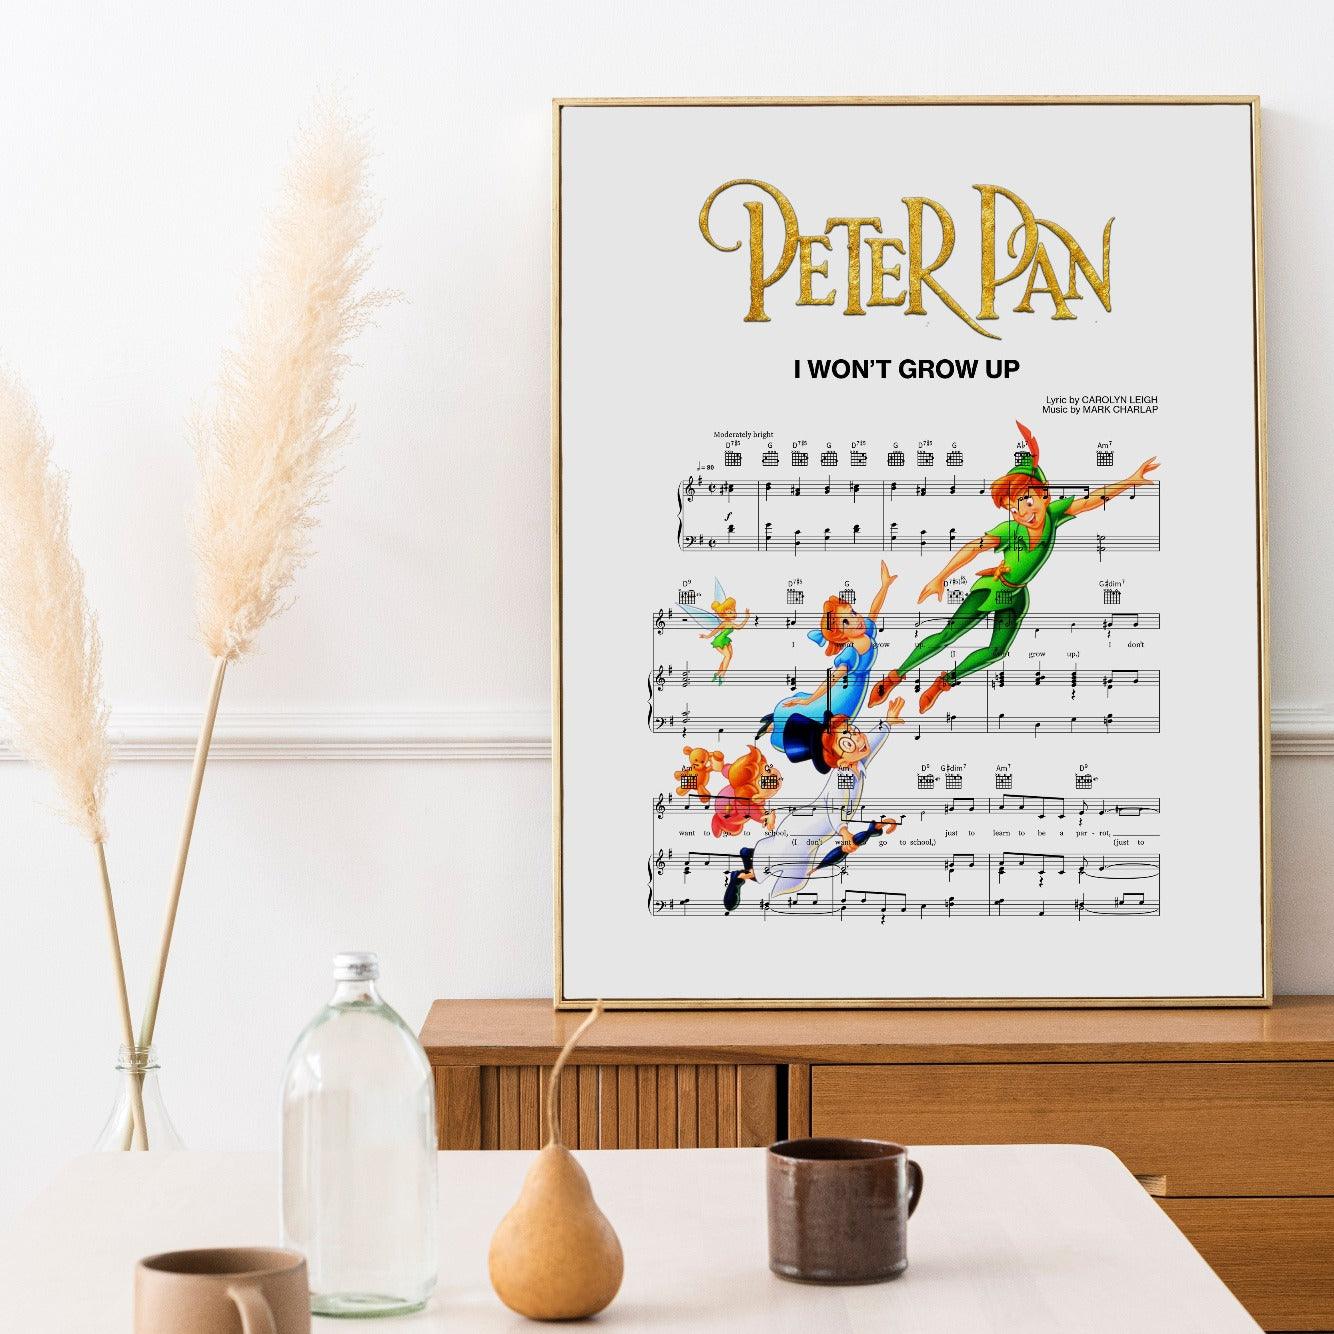 Peter Pan - I Won't Grow Up Poster | Song Music Sheet Notes Print  Everyone has a favorite song and now you can show the score as printed staff. The personal favorite song sheet print shows the song chosen as the score.